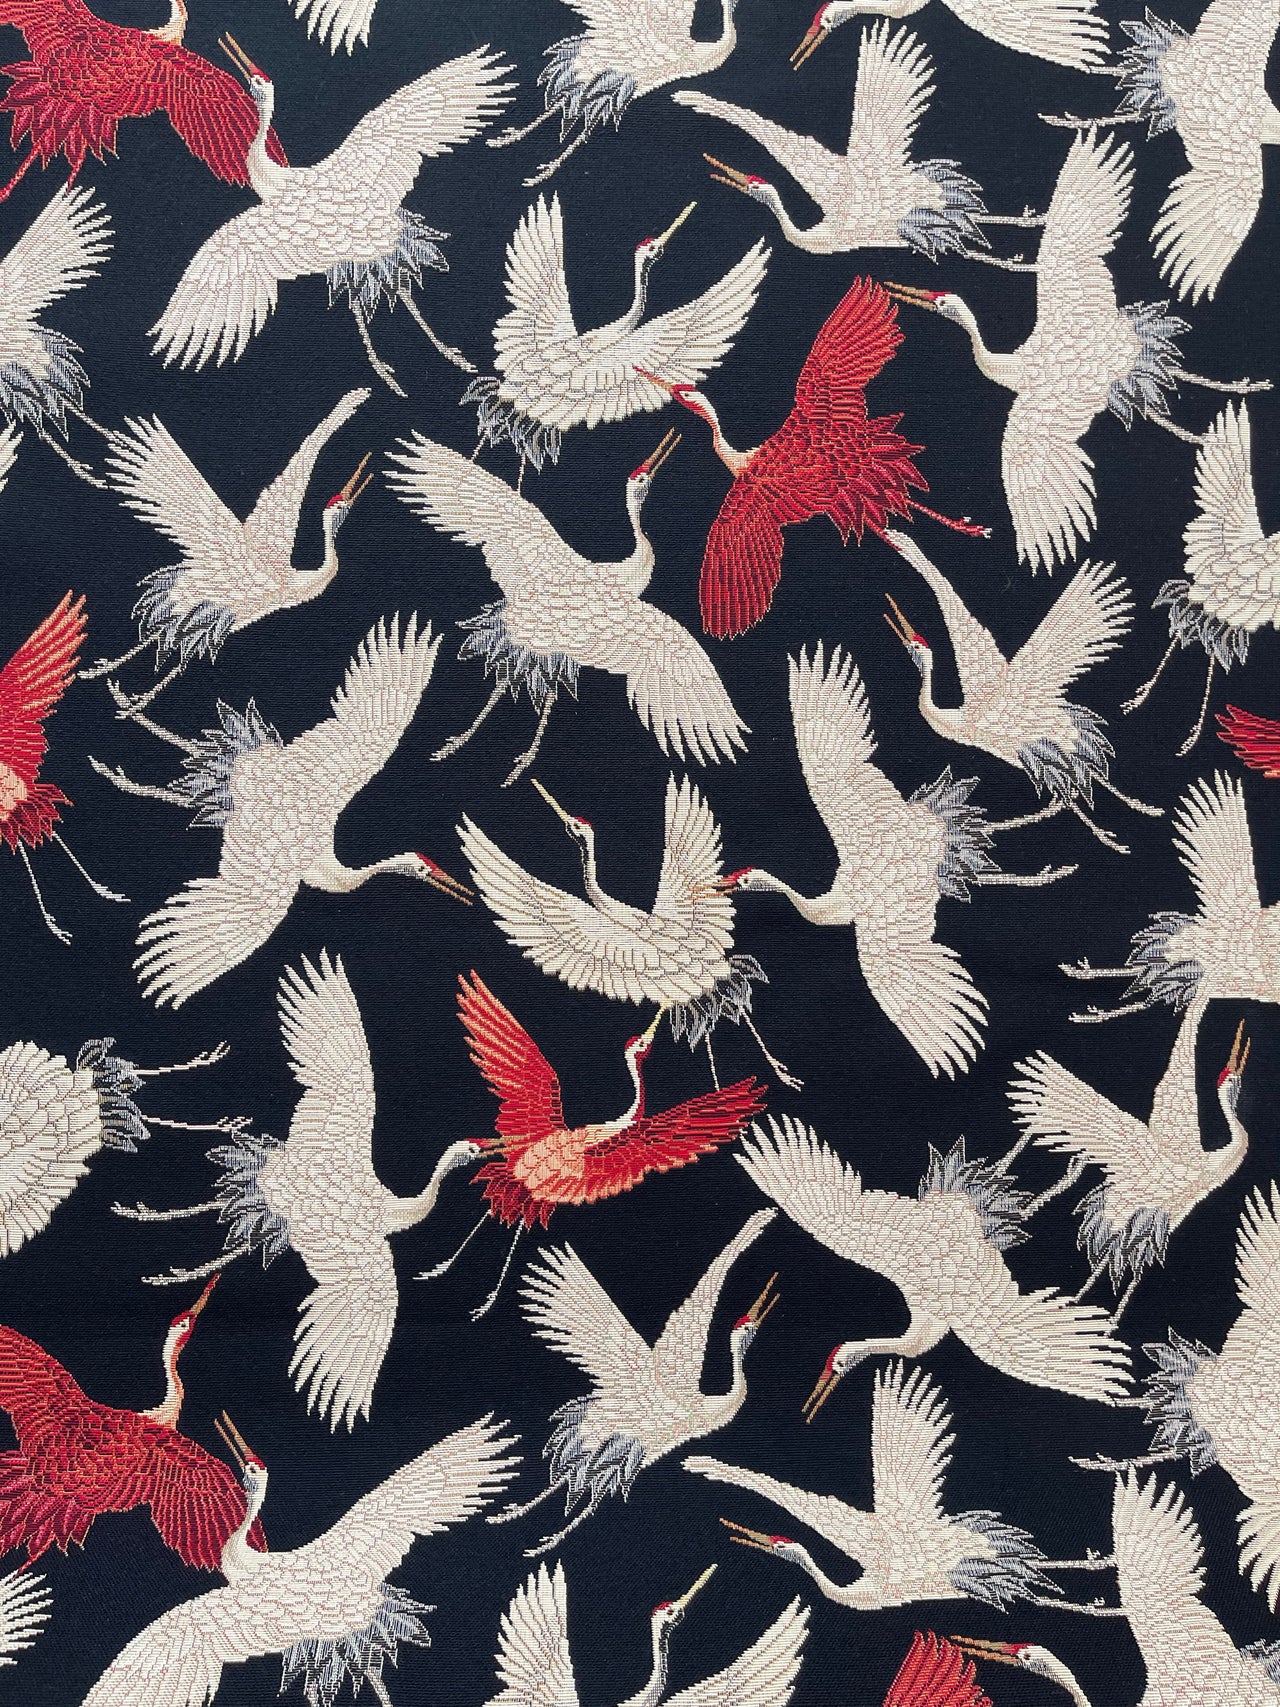 Japanese-Inspired Flying Cranes Black Woven Fabric By The Meter : Graceful Fusion of Elegance and Simplicity